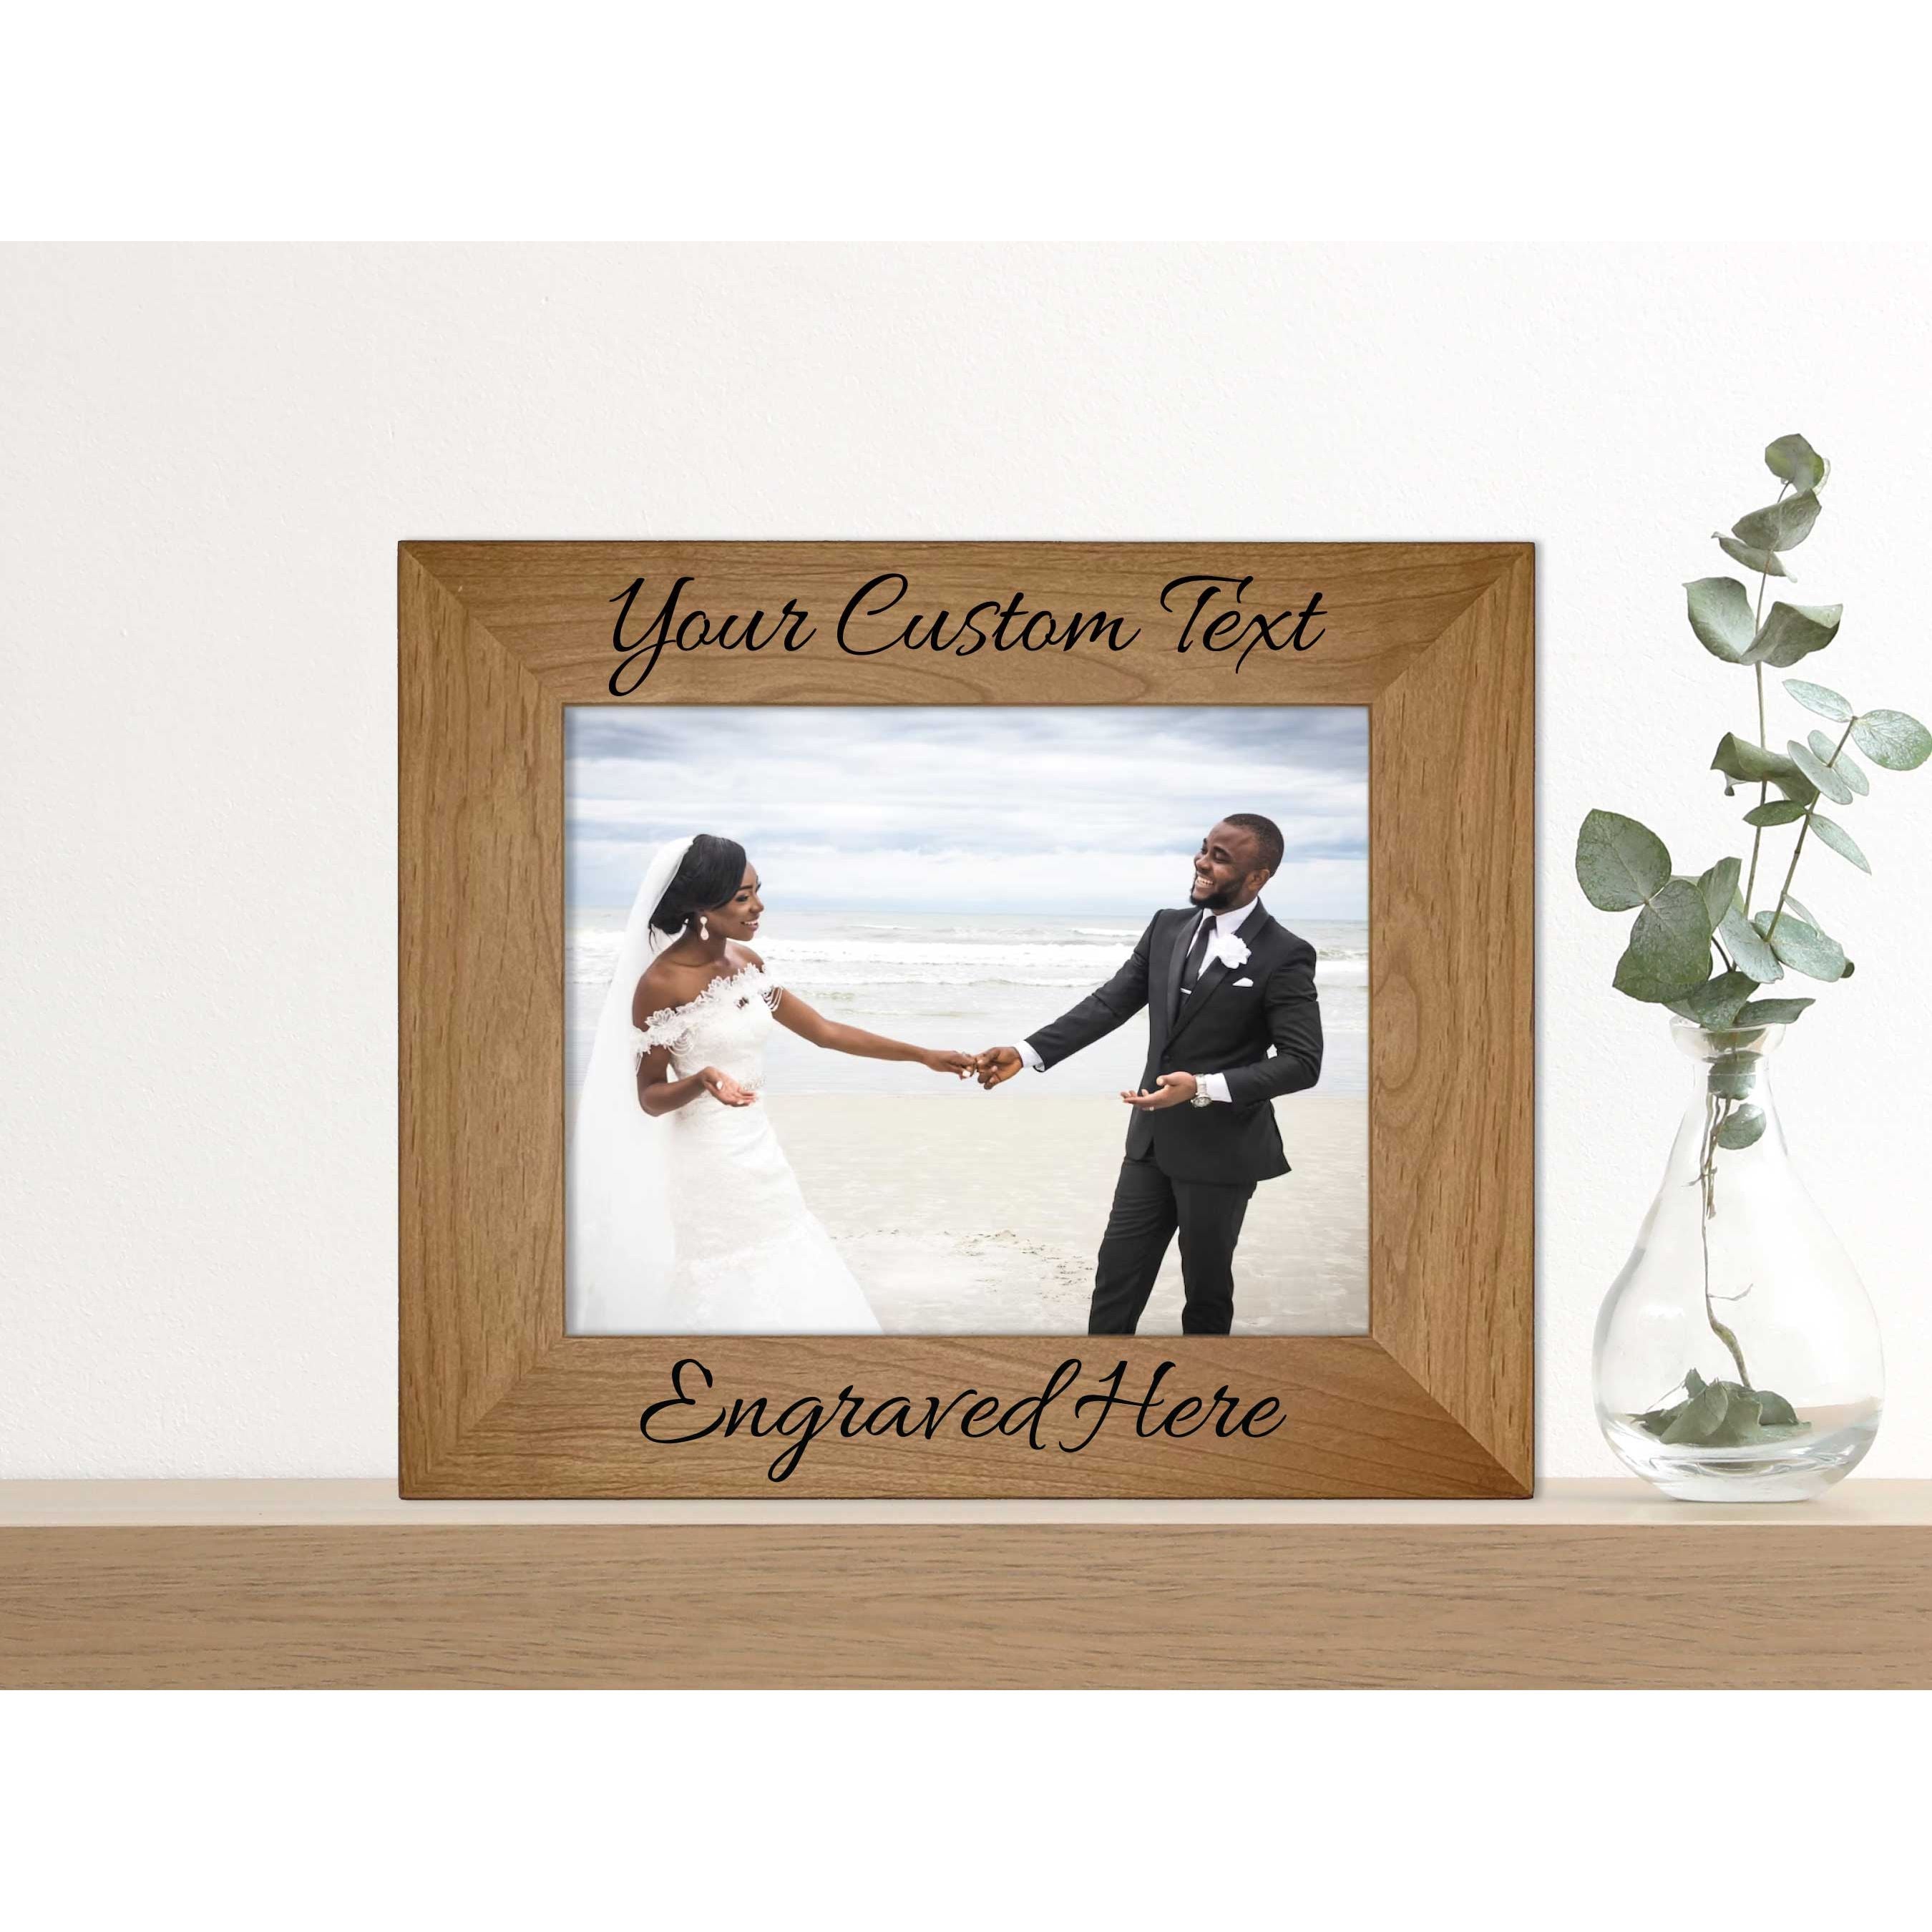 Personalized Engraved Wooden Picture Frame - 0